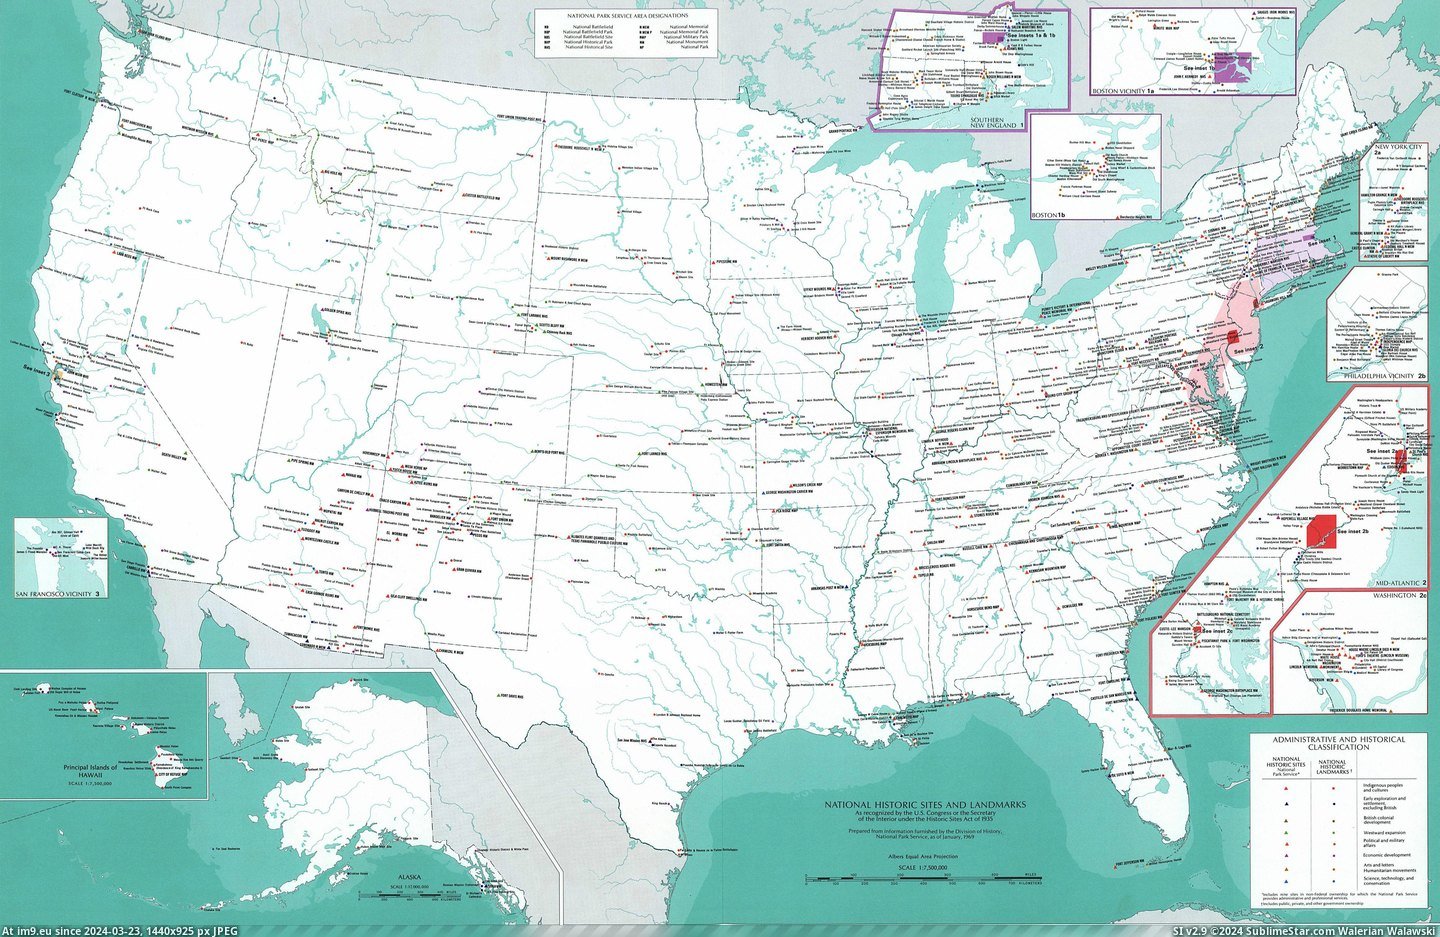 #National #States #Historic #United #Sites [Mapporn] National Historic Sites and Landmarks of the United States as of January 1969. [4639x2992] Pic. (Image of album My r/MAPS favs))